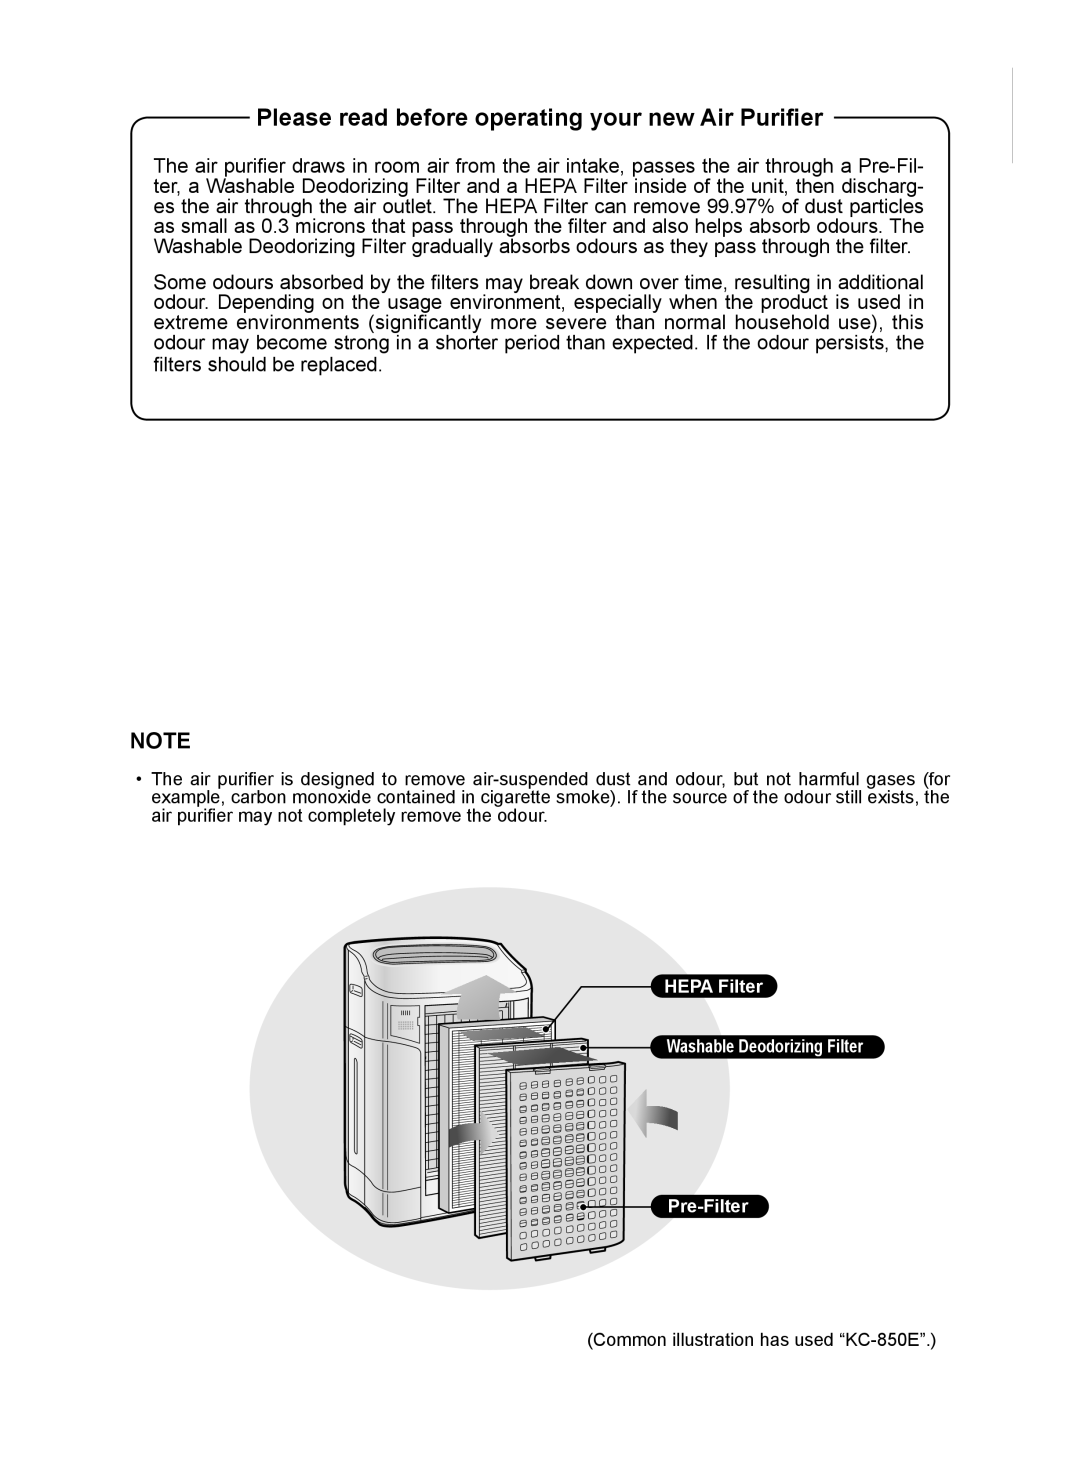 Sharp KC-850E Please read before operating your new Air Purifier, HEPA Filter Washable Deodorizing Filter Pre-Filter 